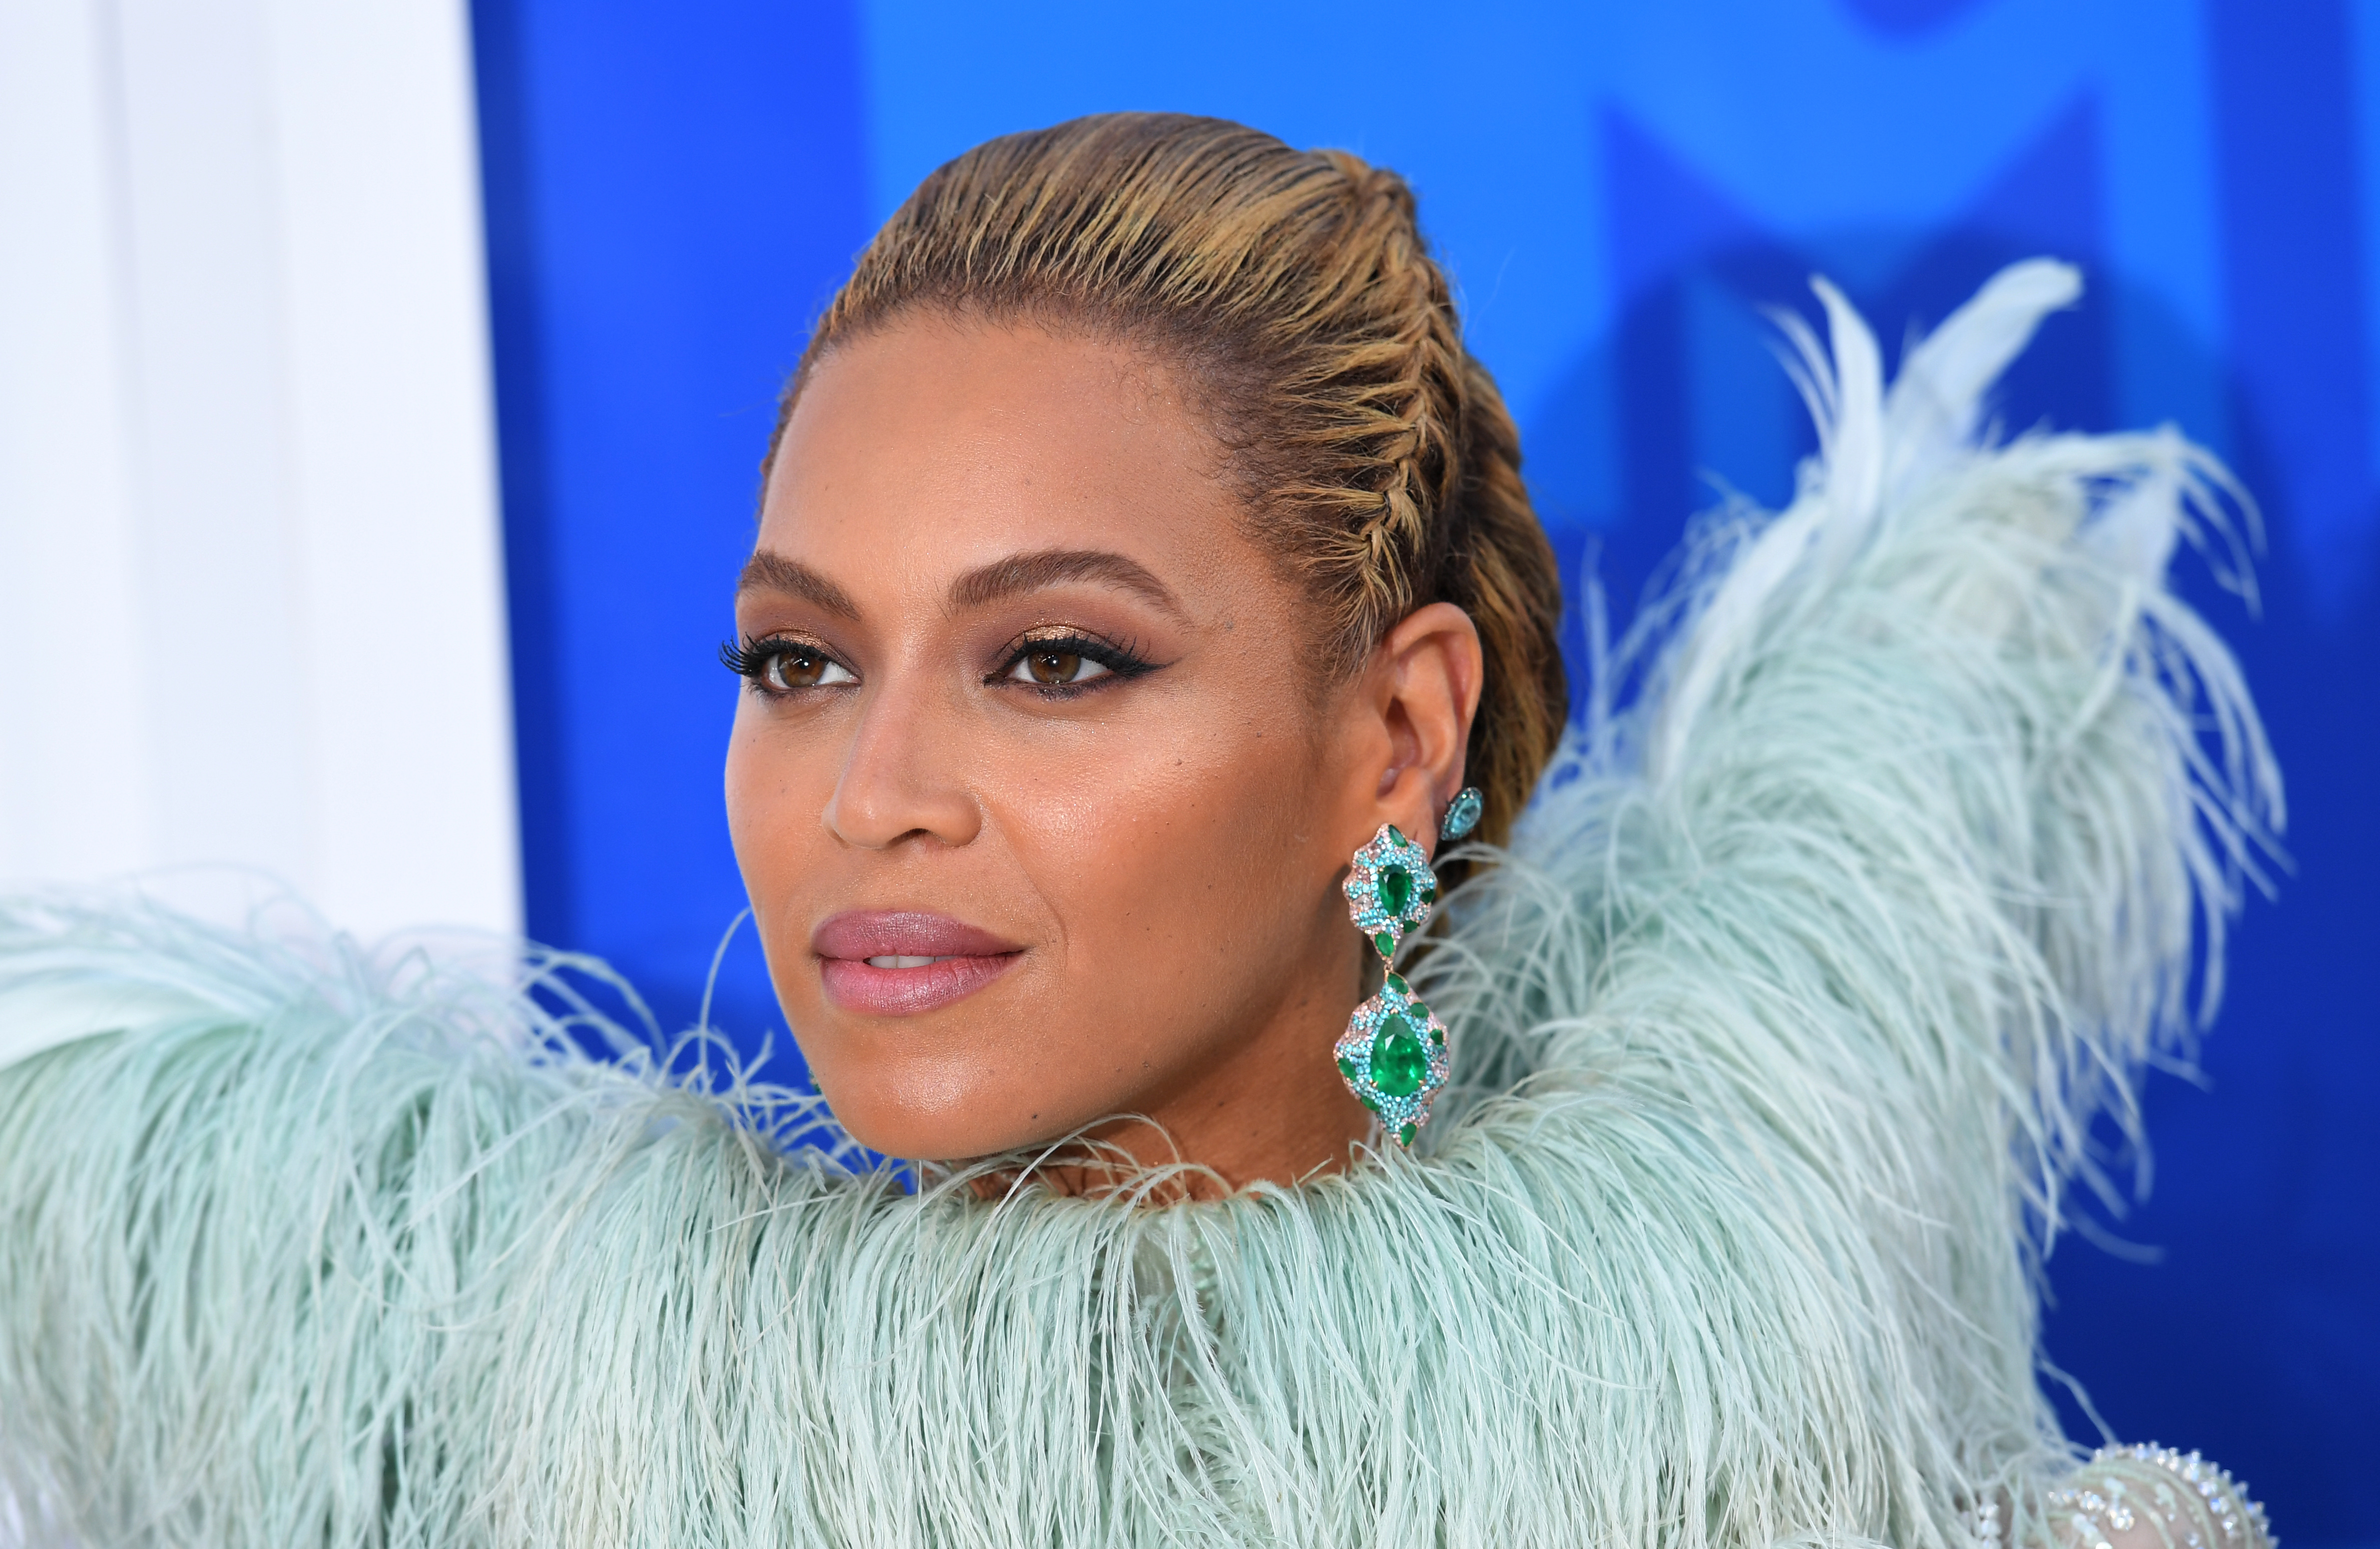 (FILES) This file photo taken on August 28, 2016 shows singer Beyonce during the 2016 MTV Video Music Awards at Madison Square Garden in New York. Pop queen Beyonce, rapper Kendrick Lamar and British rock group Radiohead will headline this year's edition of the Coachella music festival in April, organizers said January 3, 2017. The indie camp-out, which has been getting an increasingly eclectic line-up, will also feature performances from British indie pop band the xx, US folktronica outfit Bon Iver and French house music duo Justice.   / AFP PHOTO / Angela Weiss